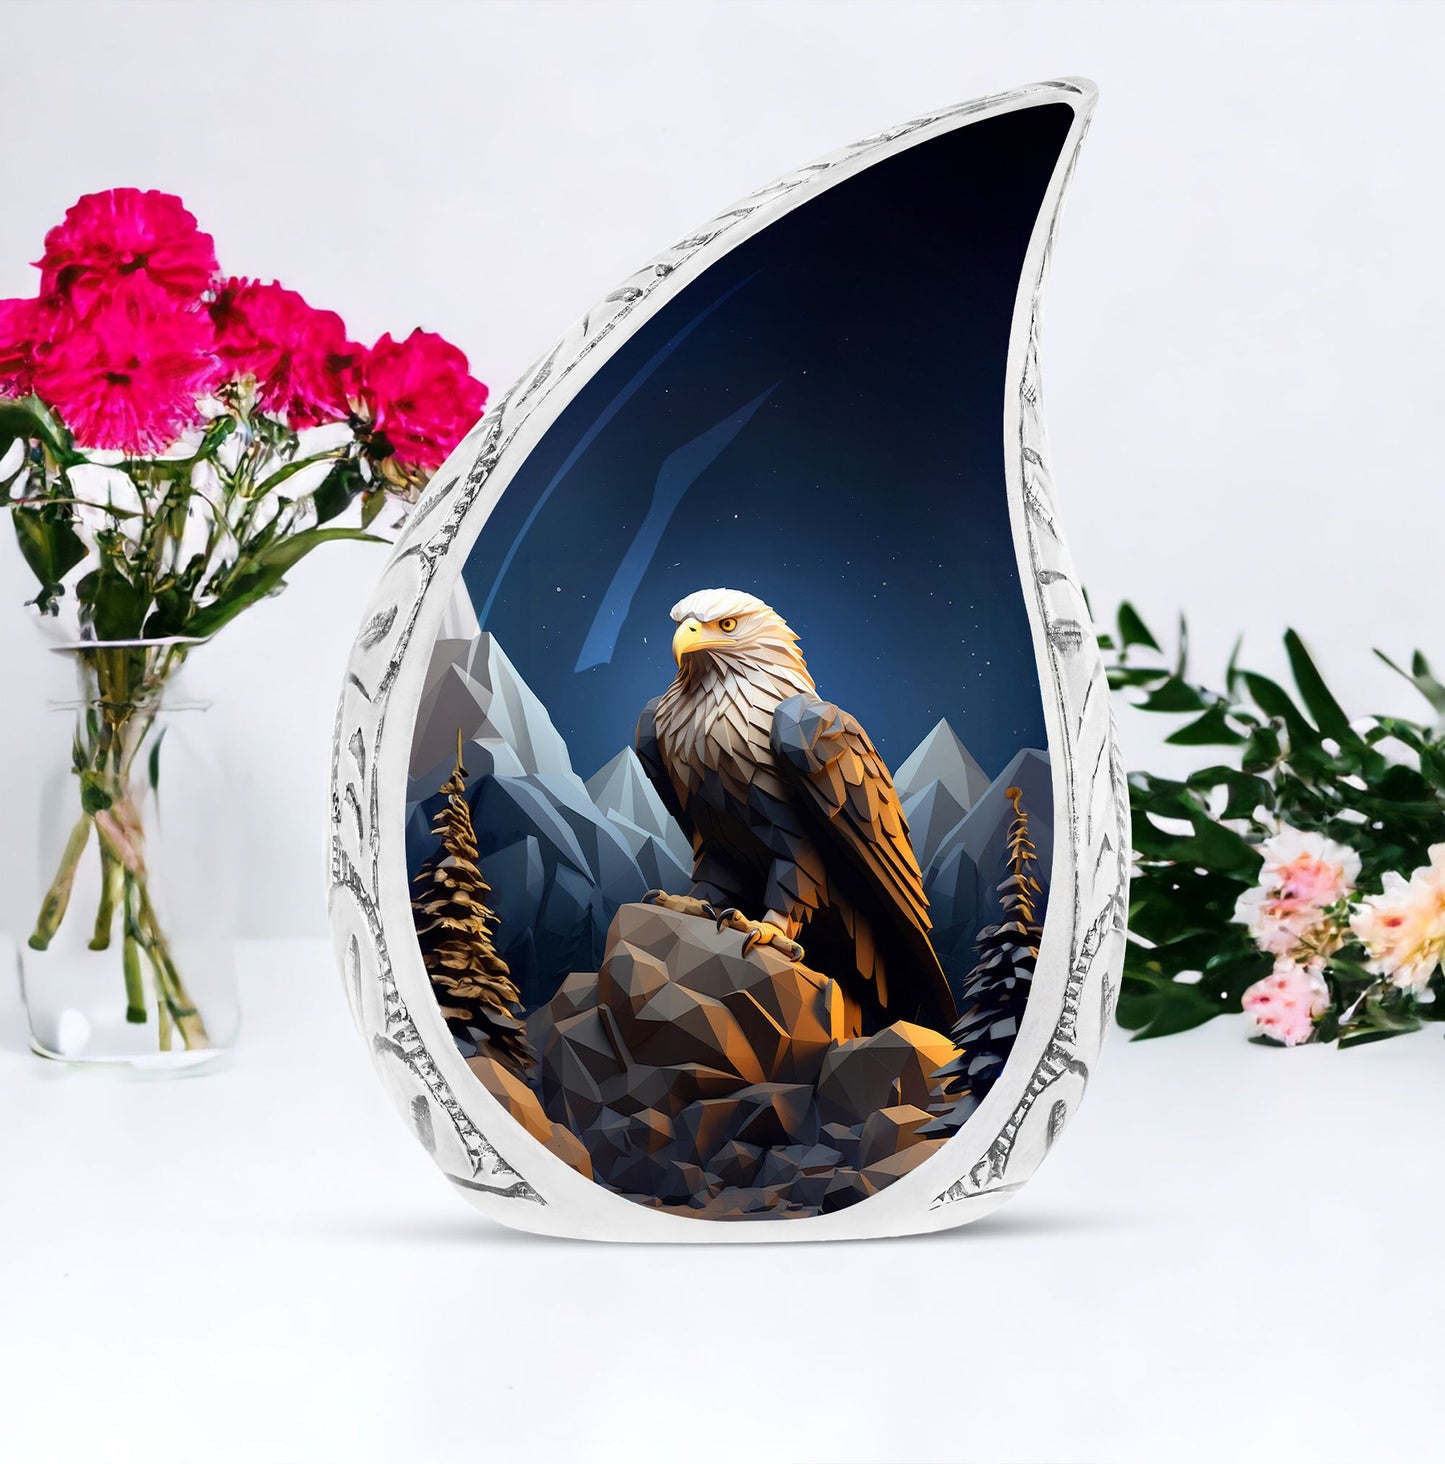 An eagle soaring over mountains designed on majestic large urn for storing adult human ashes, an unique funeral decoration